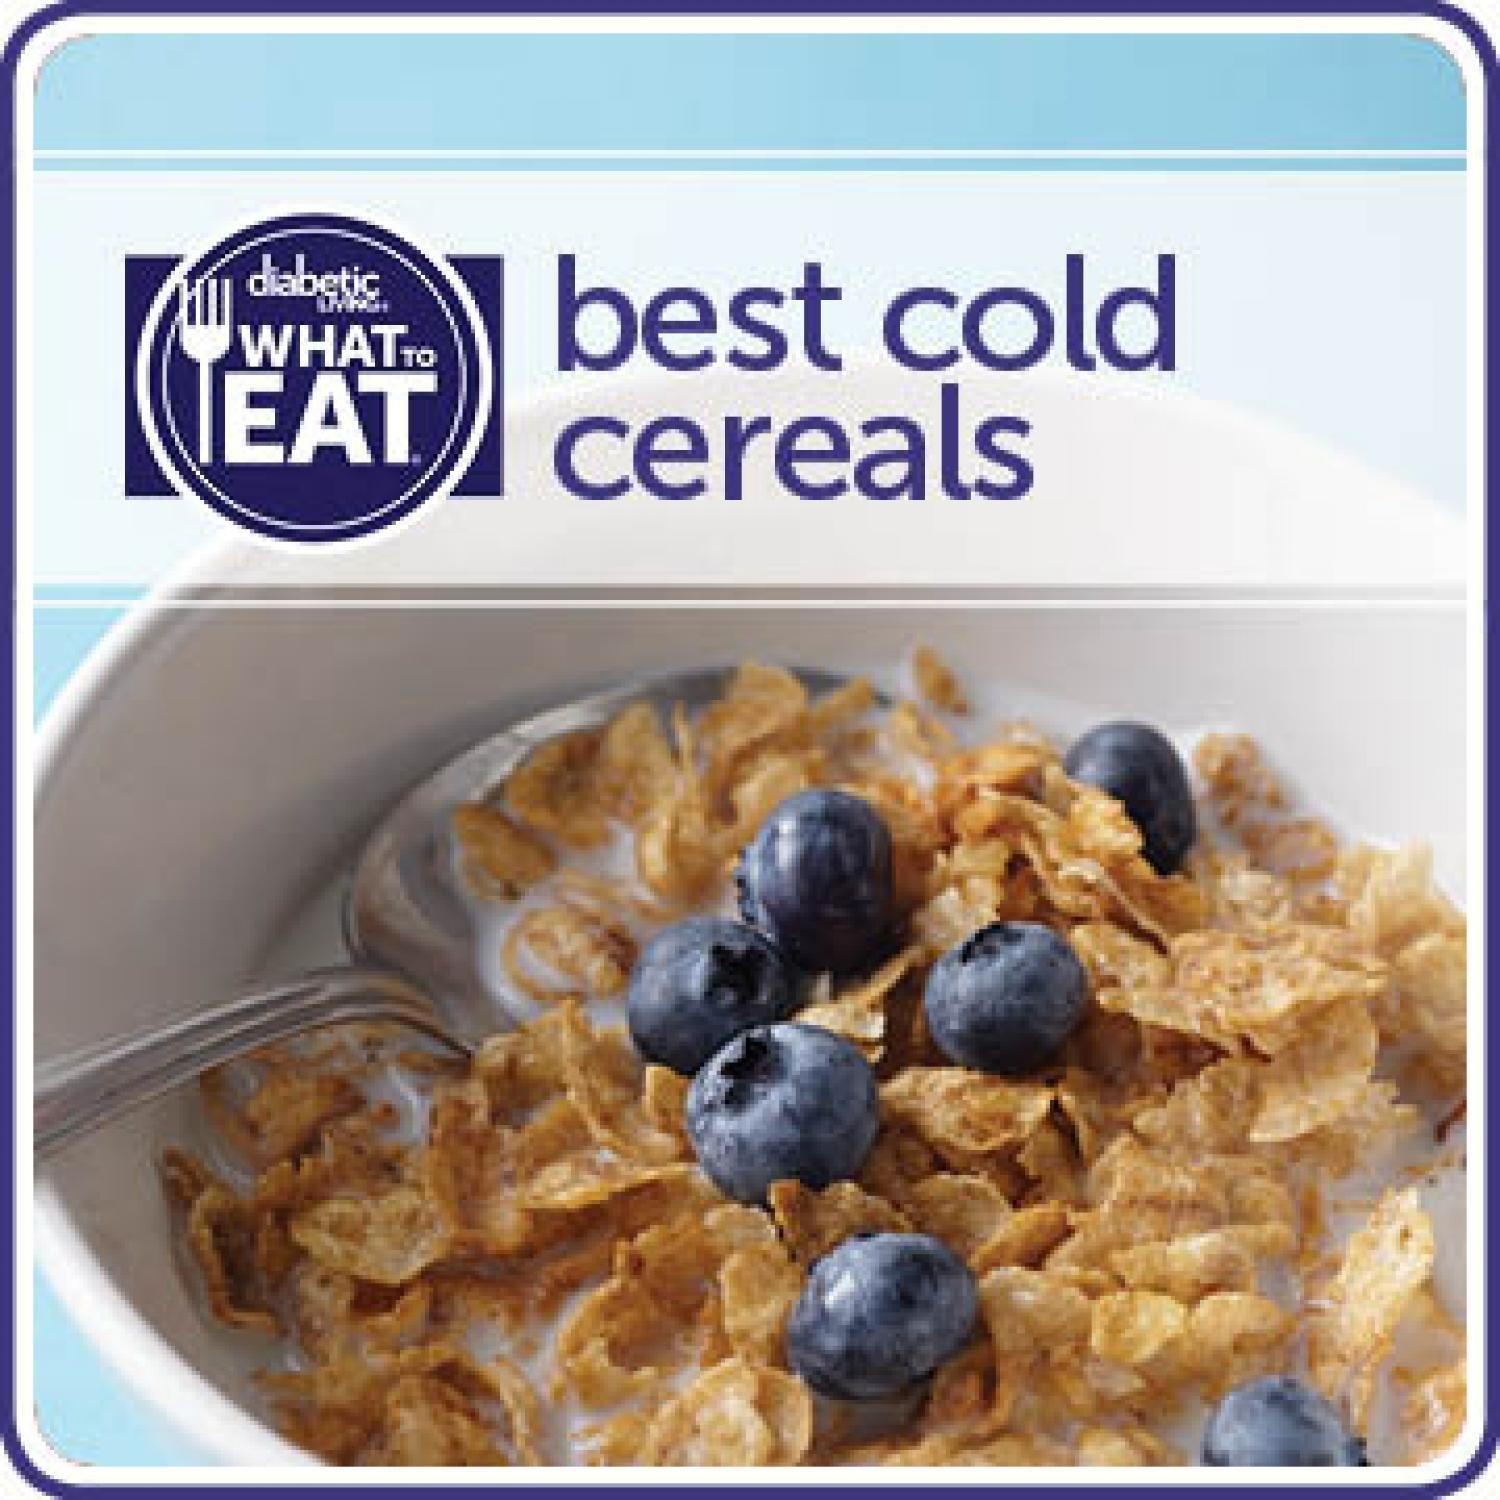 What To Eat With Diabetes: Best Cold Cereals